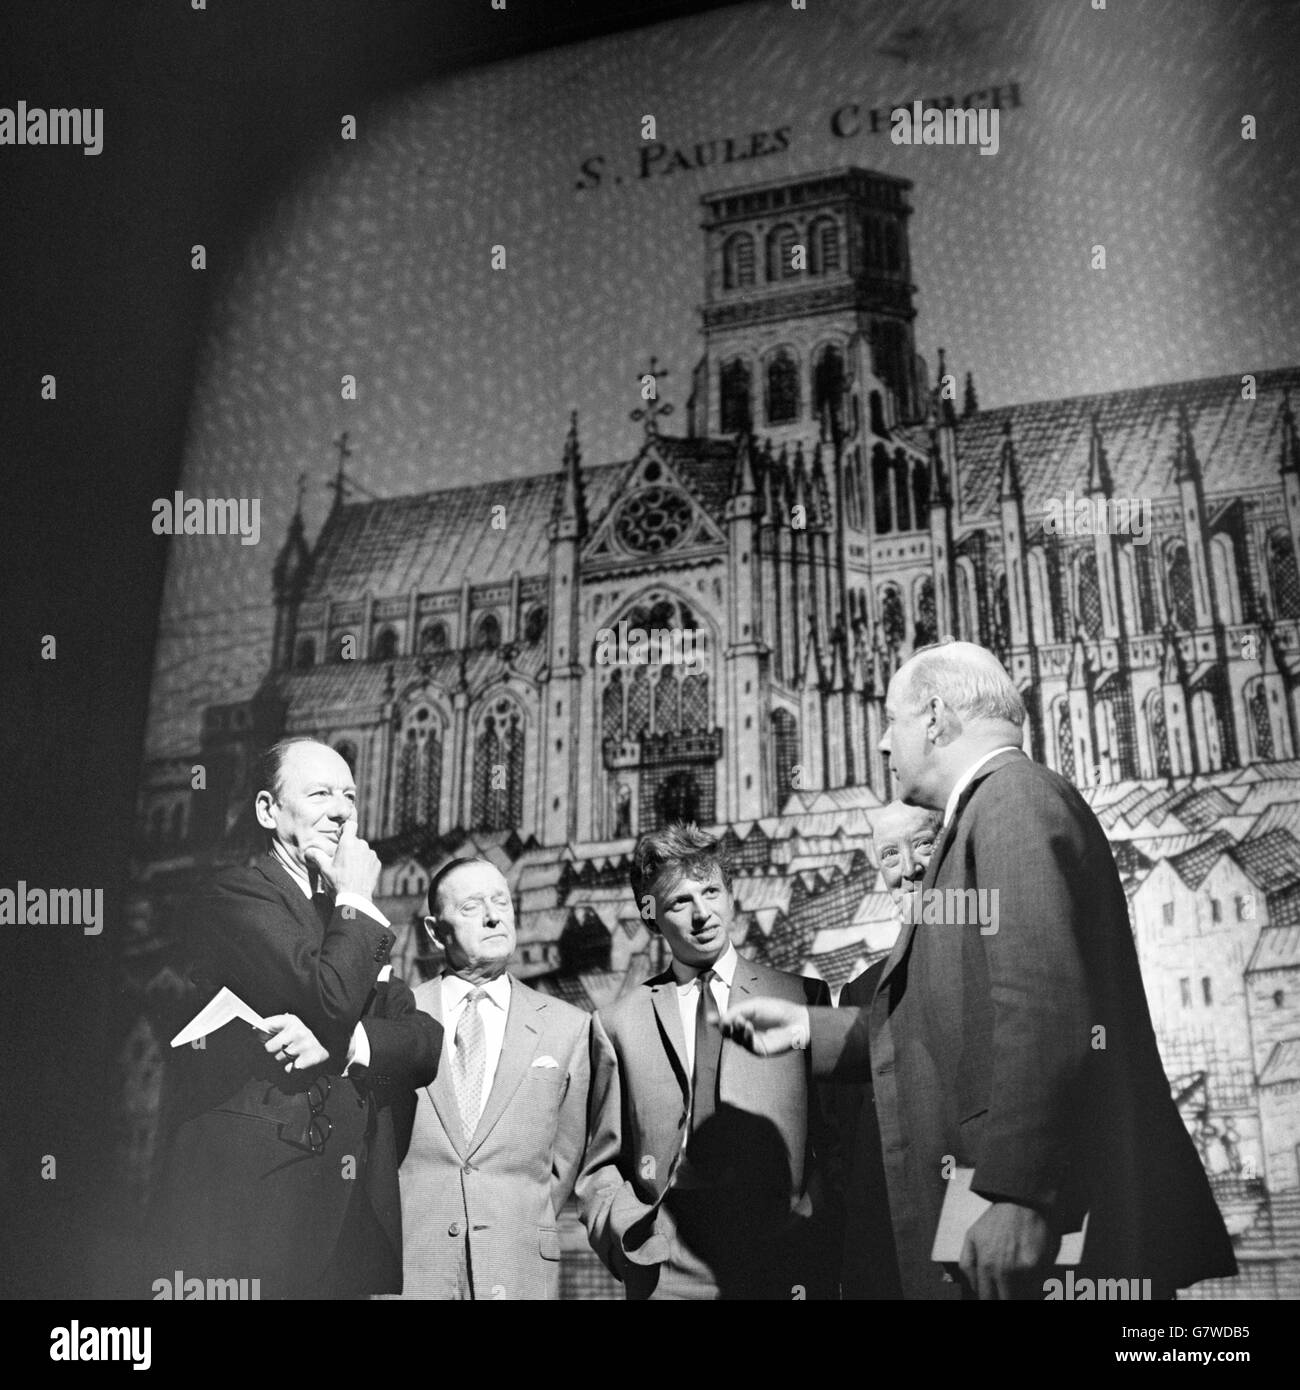 The entertainment to be given when the Queen attends a City of London Festival reception on July 9 is discussed by some of the participants at the Prince's Theatre, London. Left to right - SIR JOHN GIELGUD: RANDOLPH SUTTON: TOMMY STEELE: BILLY DANVERS: and JOHN BETJEMAN. They are talking in front of a projected drawing of St. Paul's Cathedral as it was before the Great Fire. Projections such as this will form the background when John Betjeman and Sir John give a series of prose and verse readings. Stock Photo